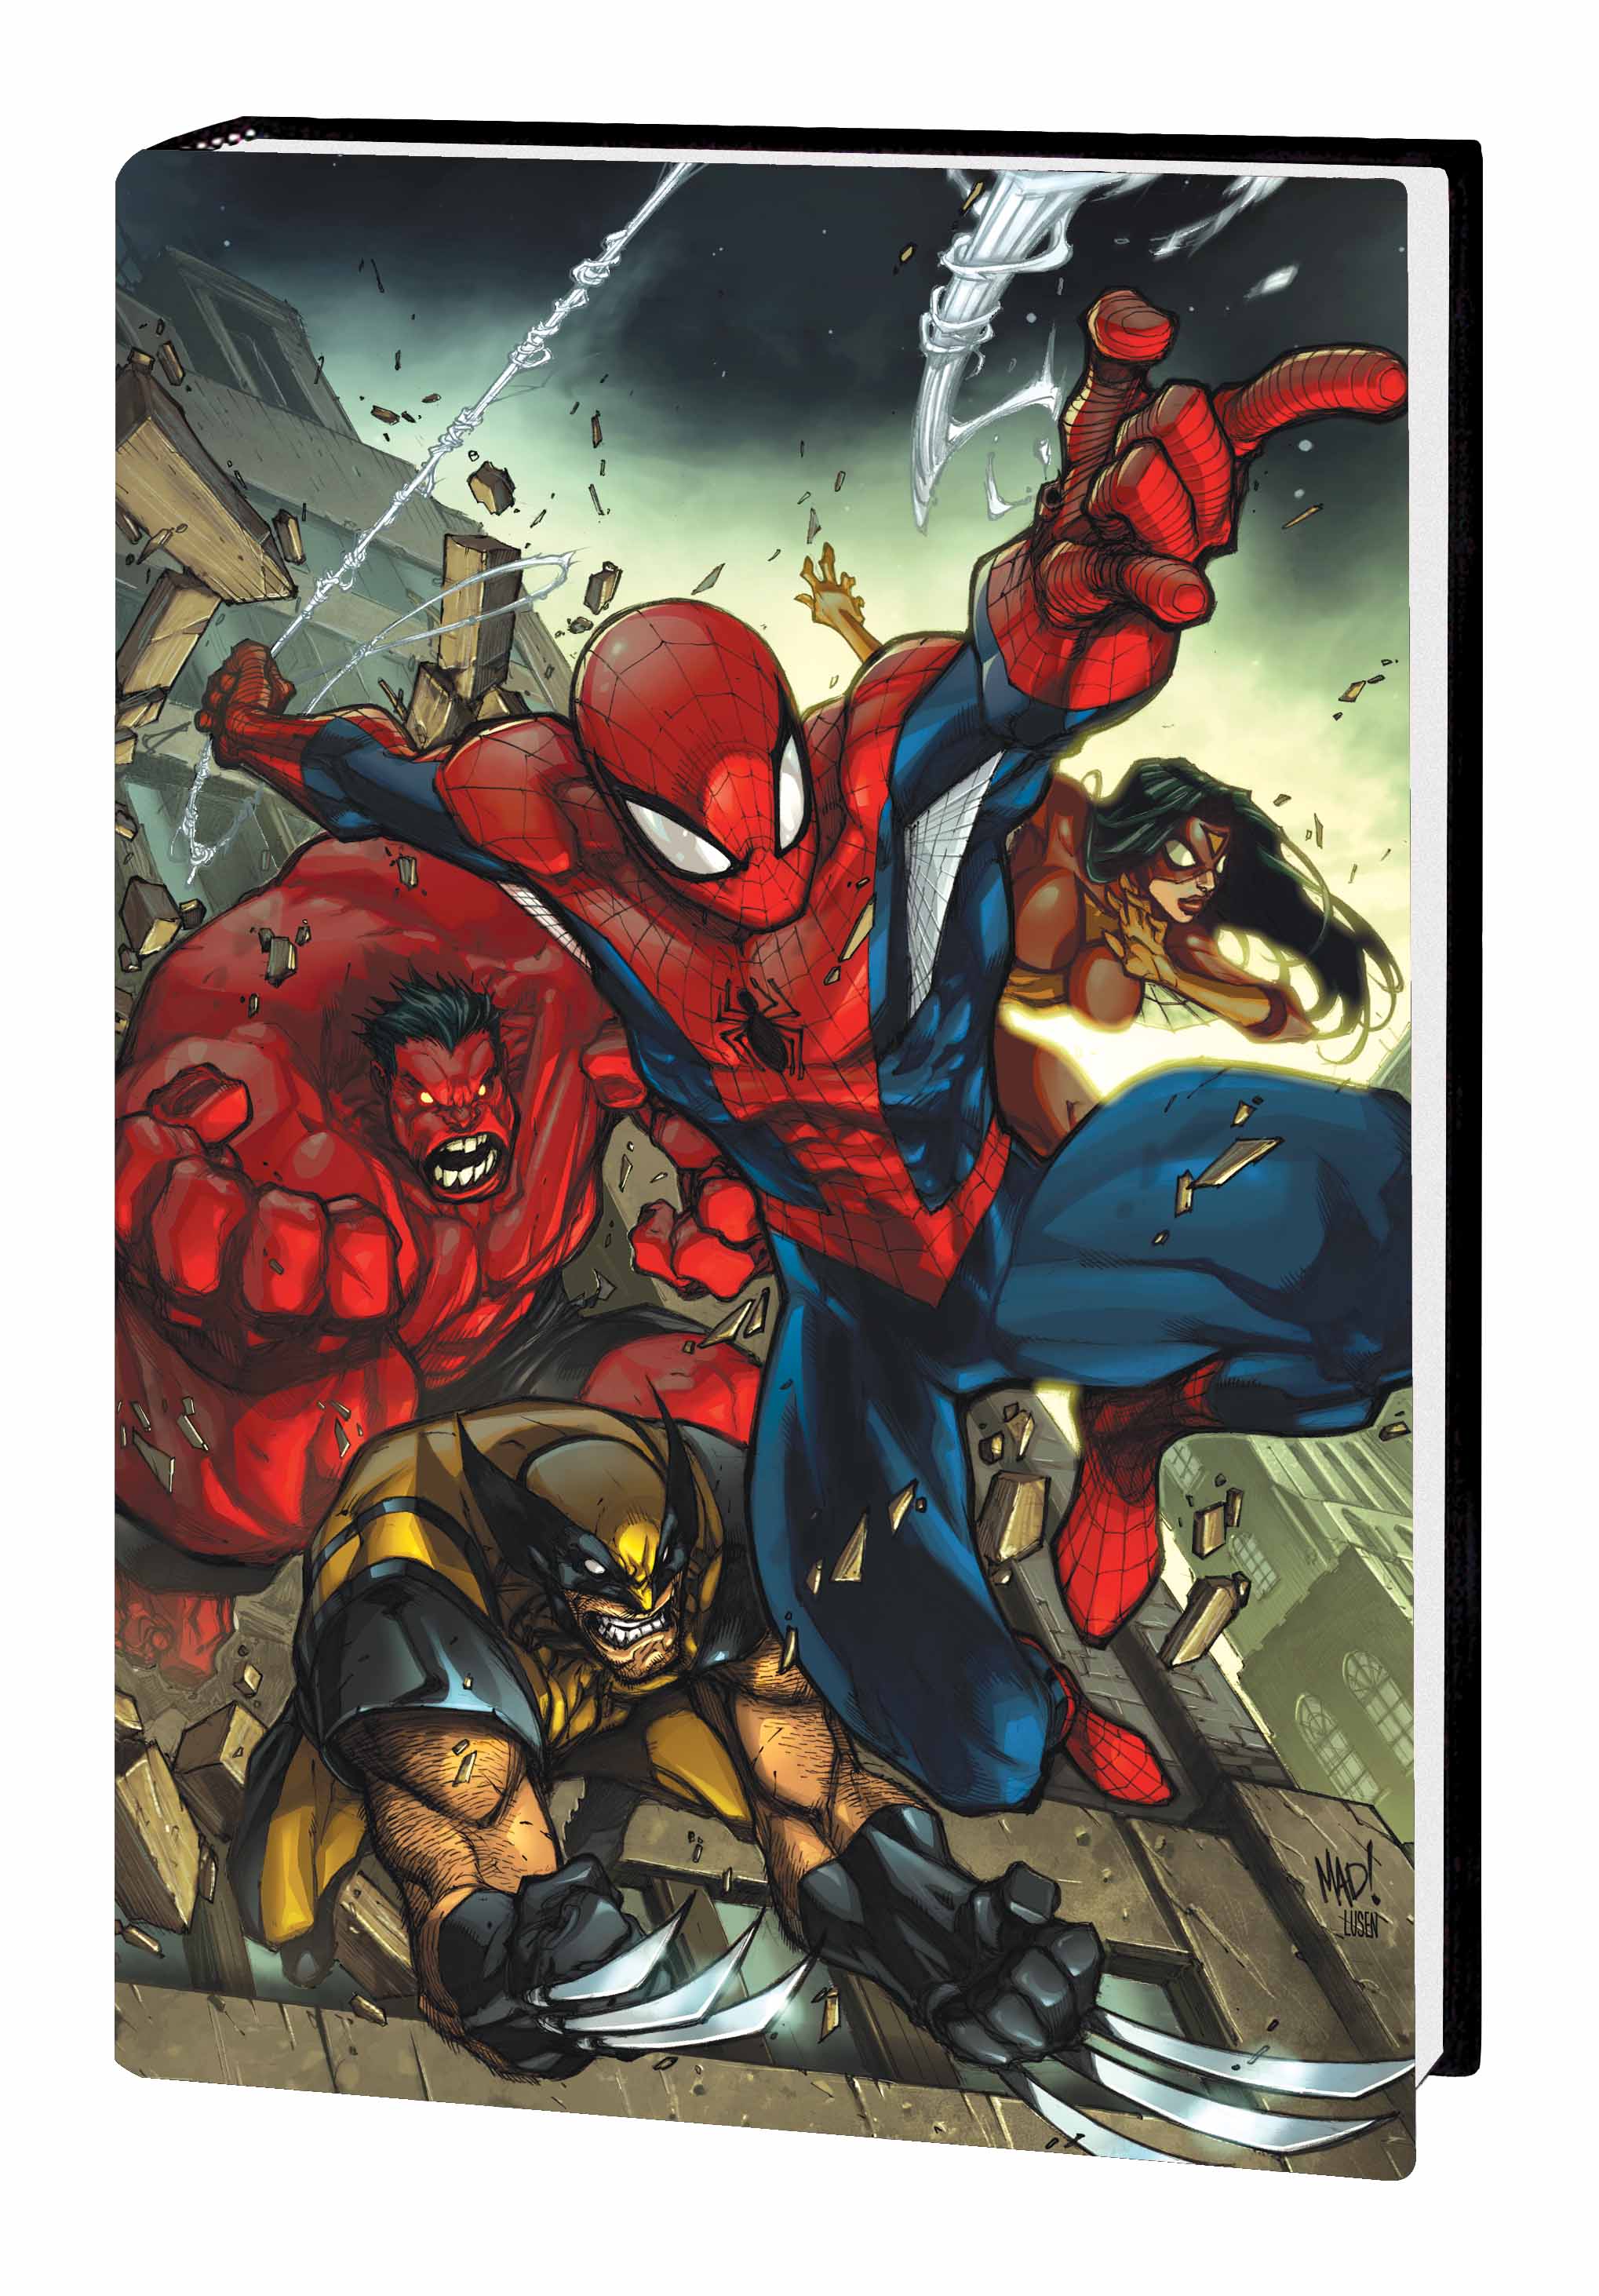 AVENGING SPIDER-MAN: MY FRIENDS CAN BEAT UP YOUR FRIENDS (Hardcover)